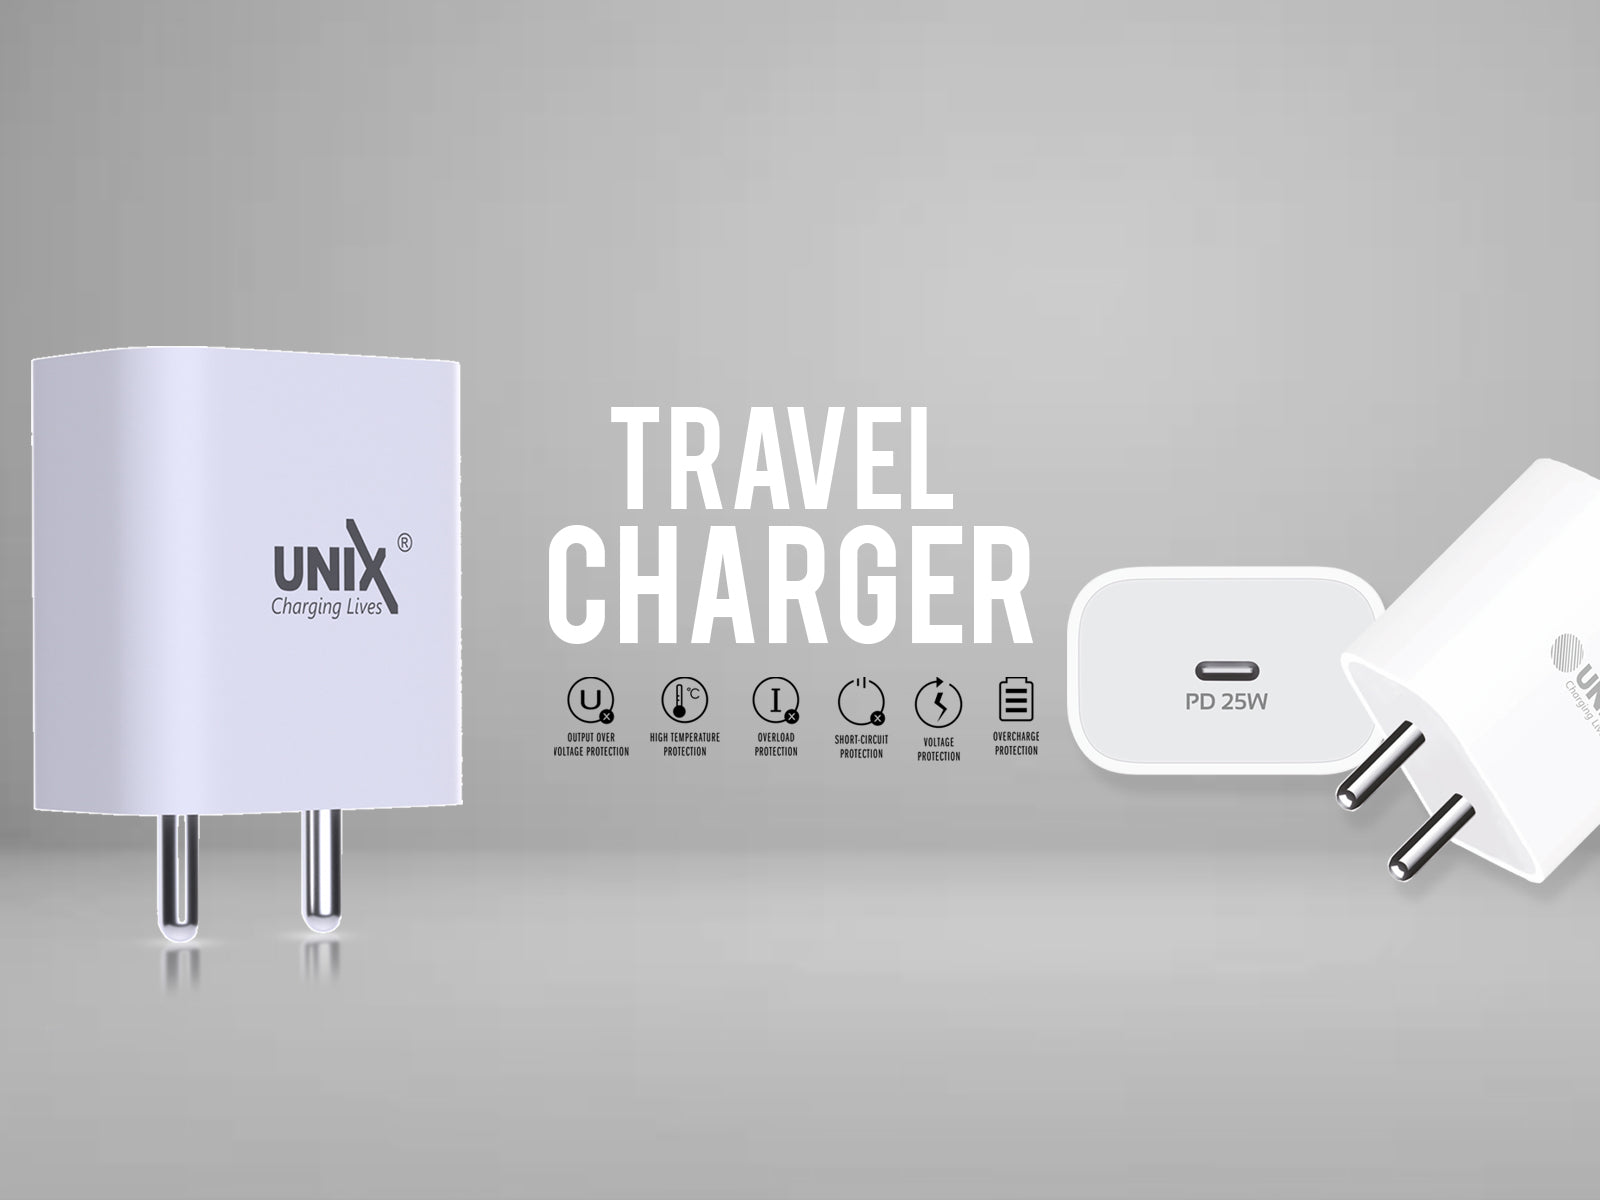 Buy Unix Fast Travel Charger at best price